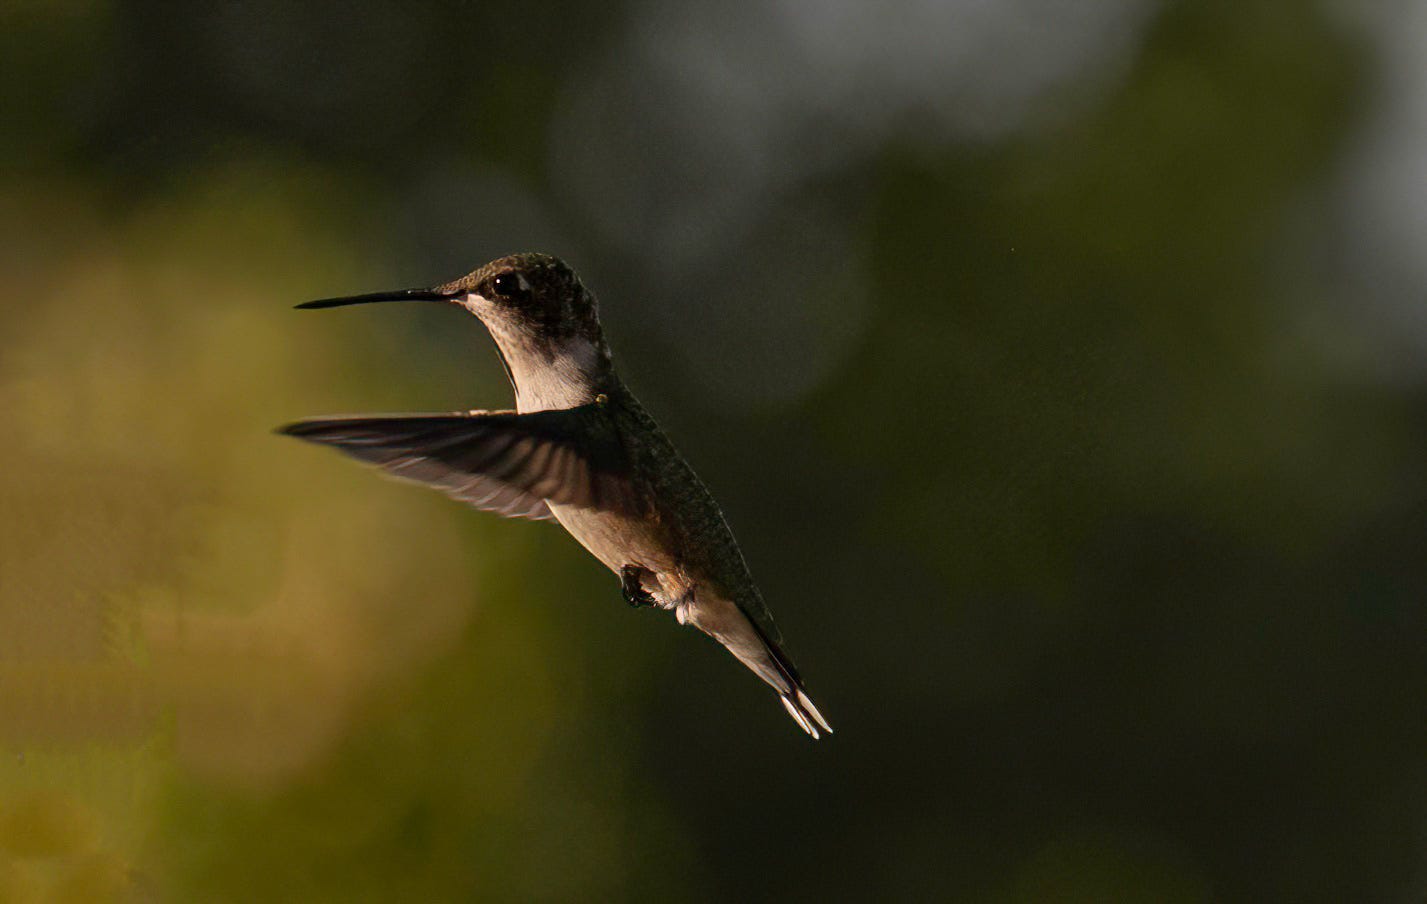 Female Rufous hummingbird with wings pointed forward and facing to the left with a blurred background